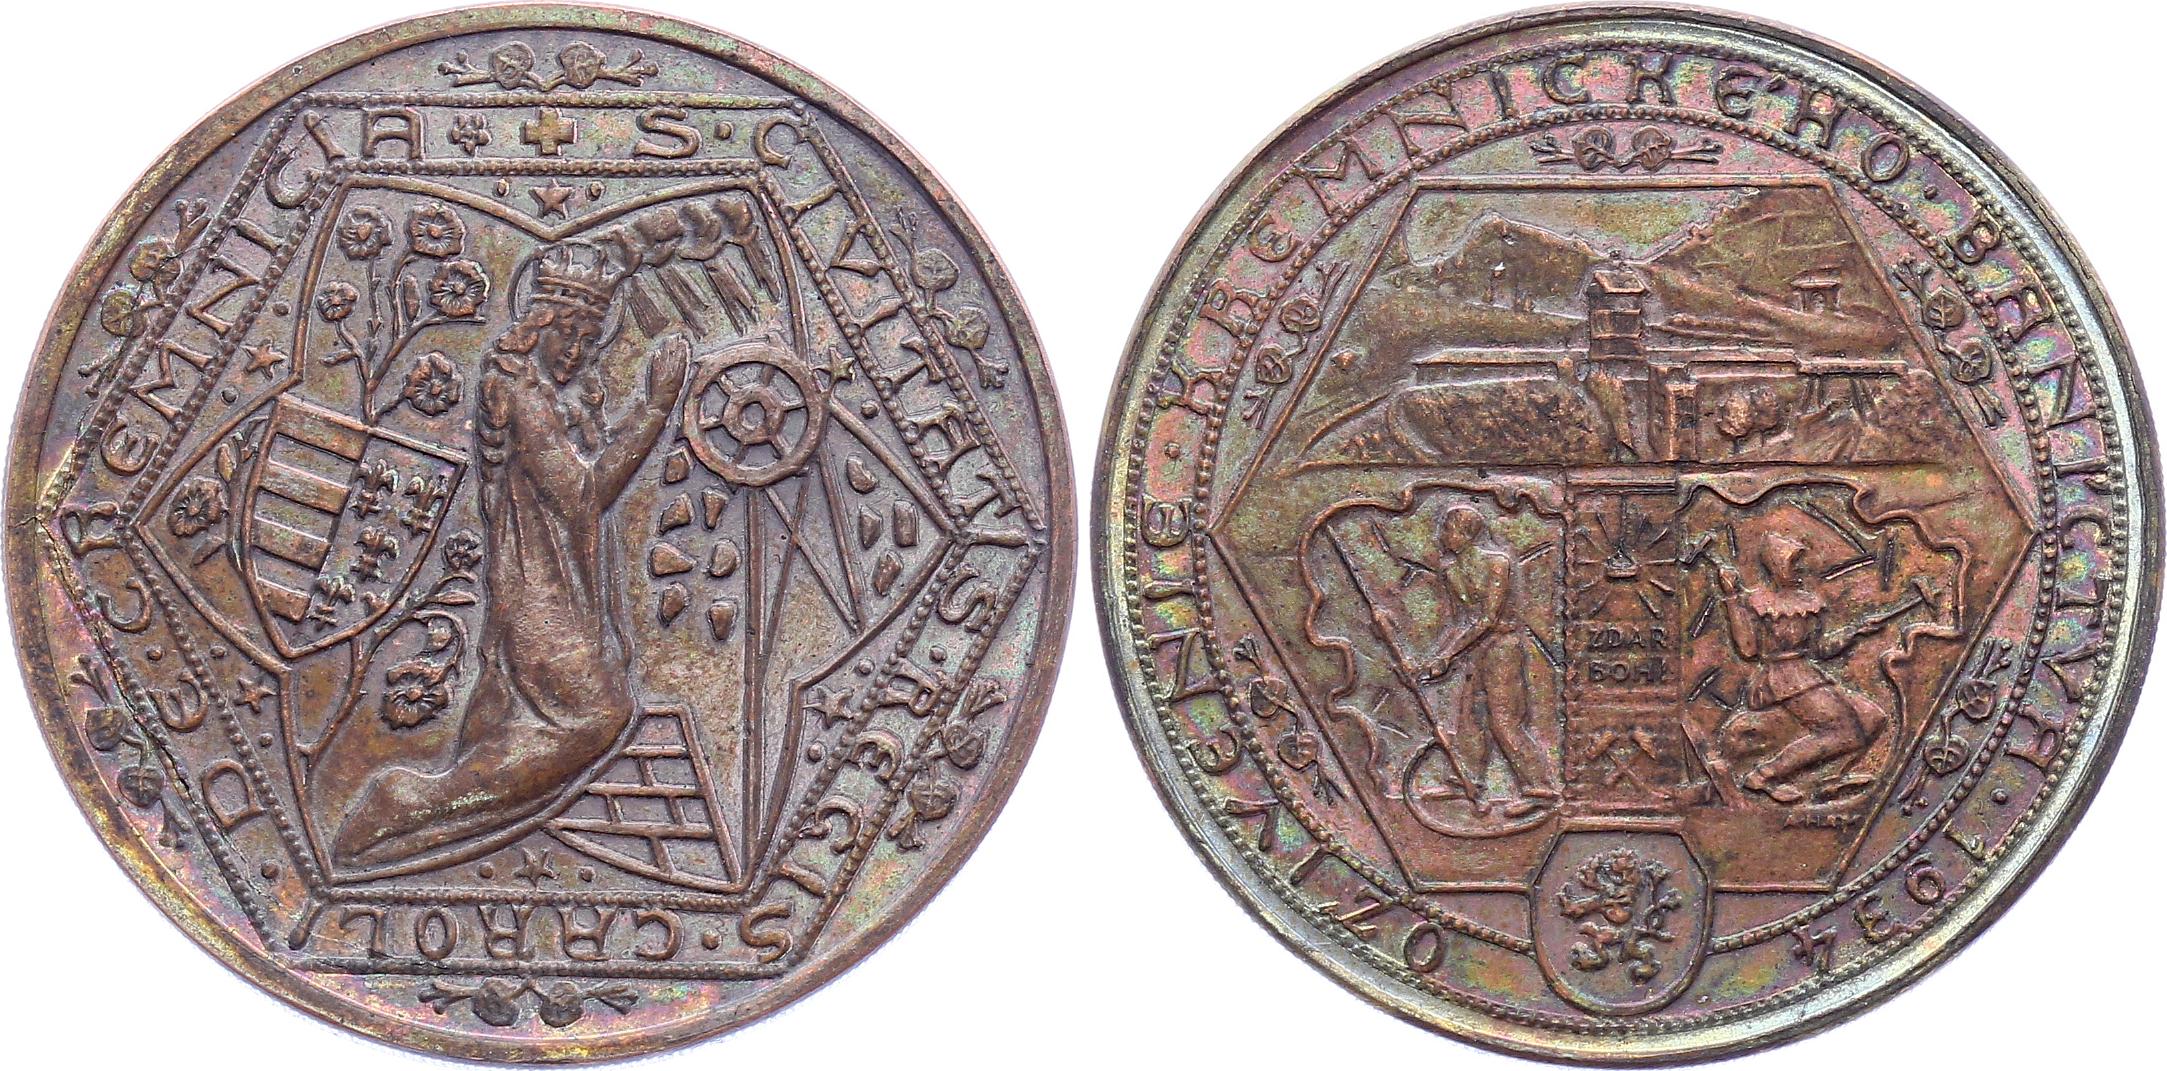 Czechoslovakia Medal "Reopening of the Kremnica Mines" Probe in COPPER - Proof - Unique piece!!!